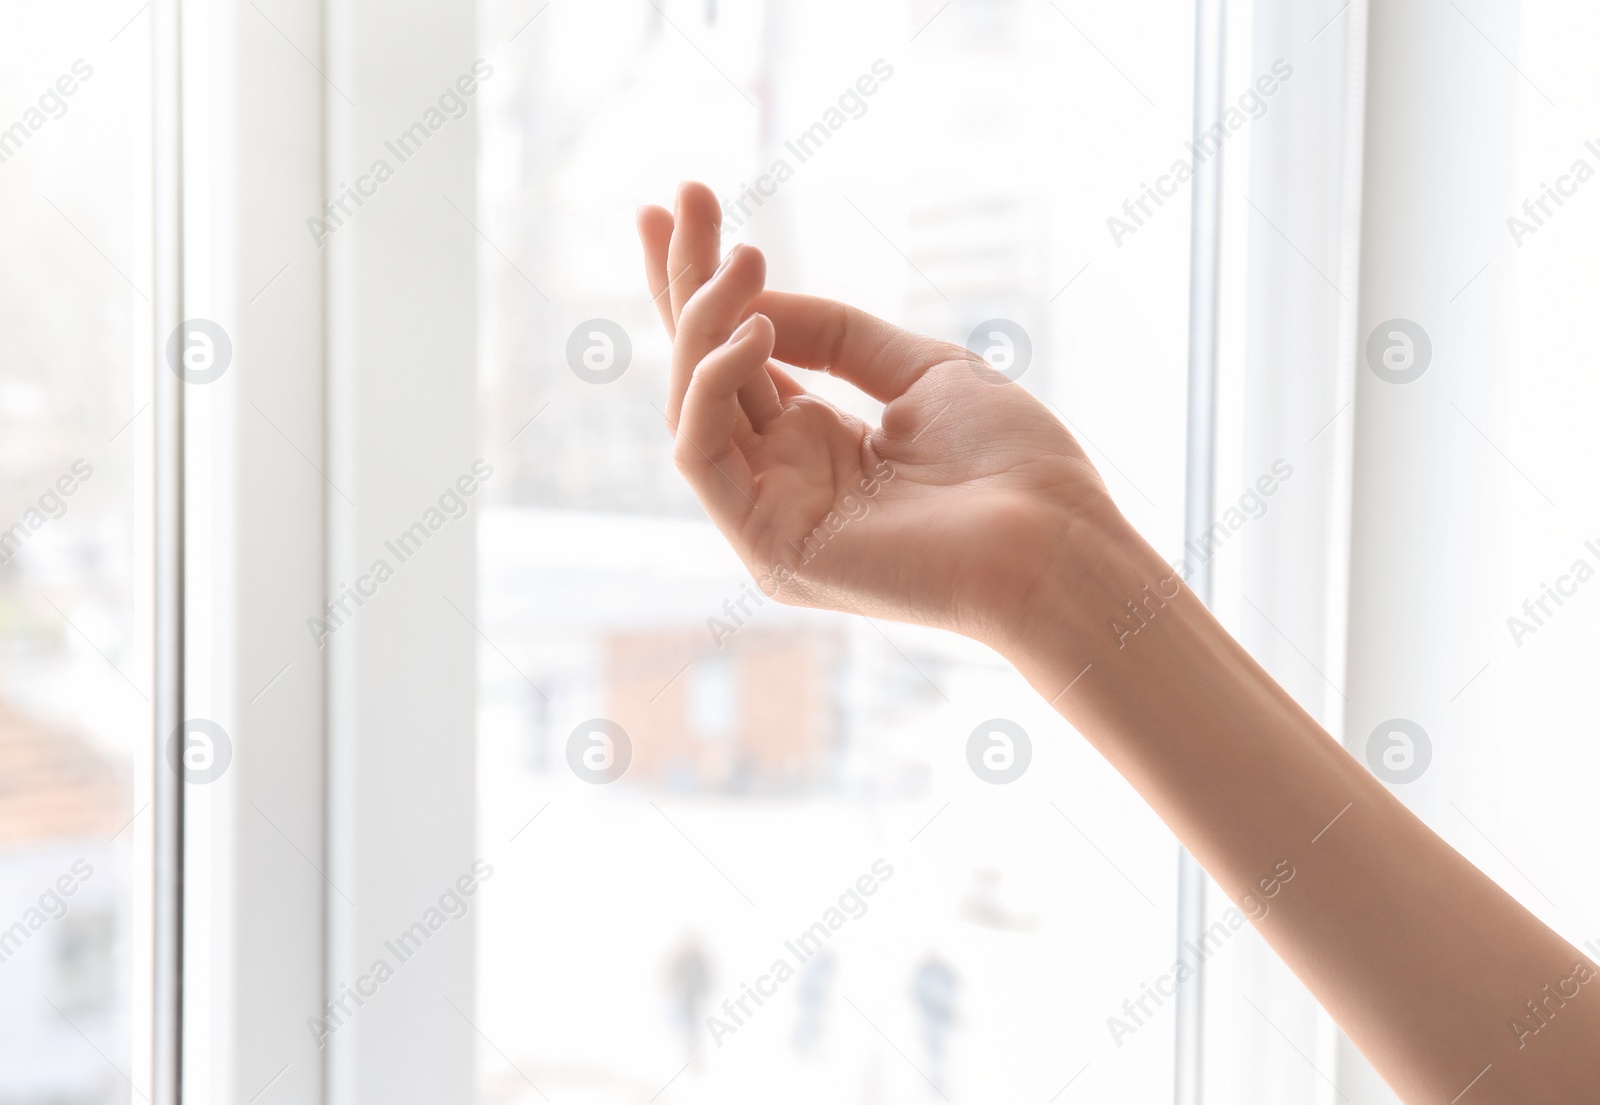 Photo of Young woman against window. Focus on hand moisturized with cream